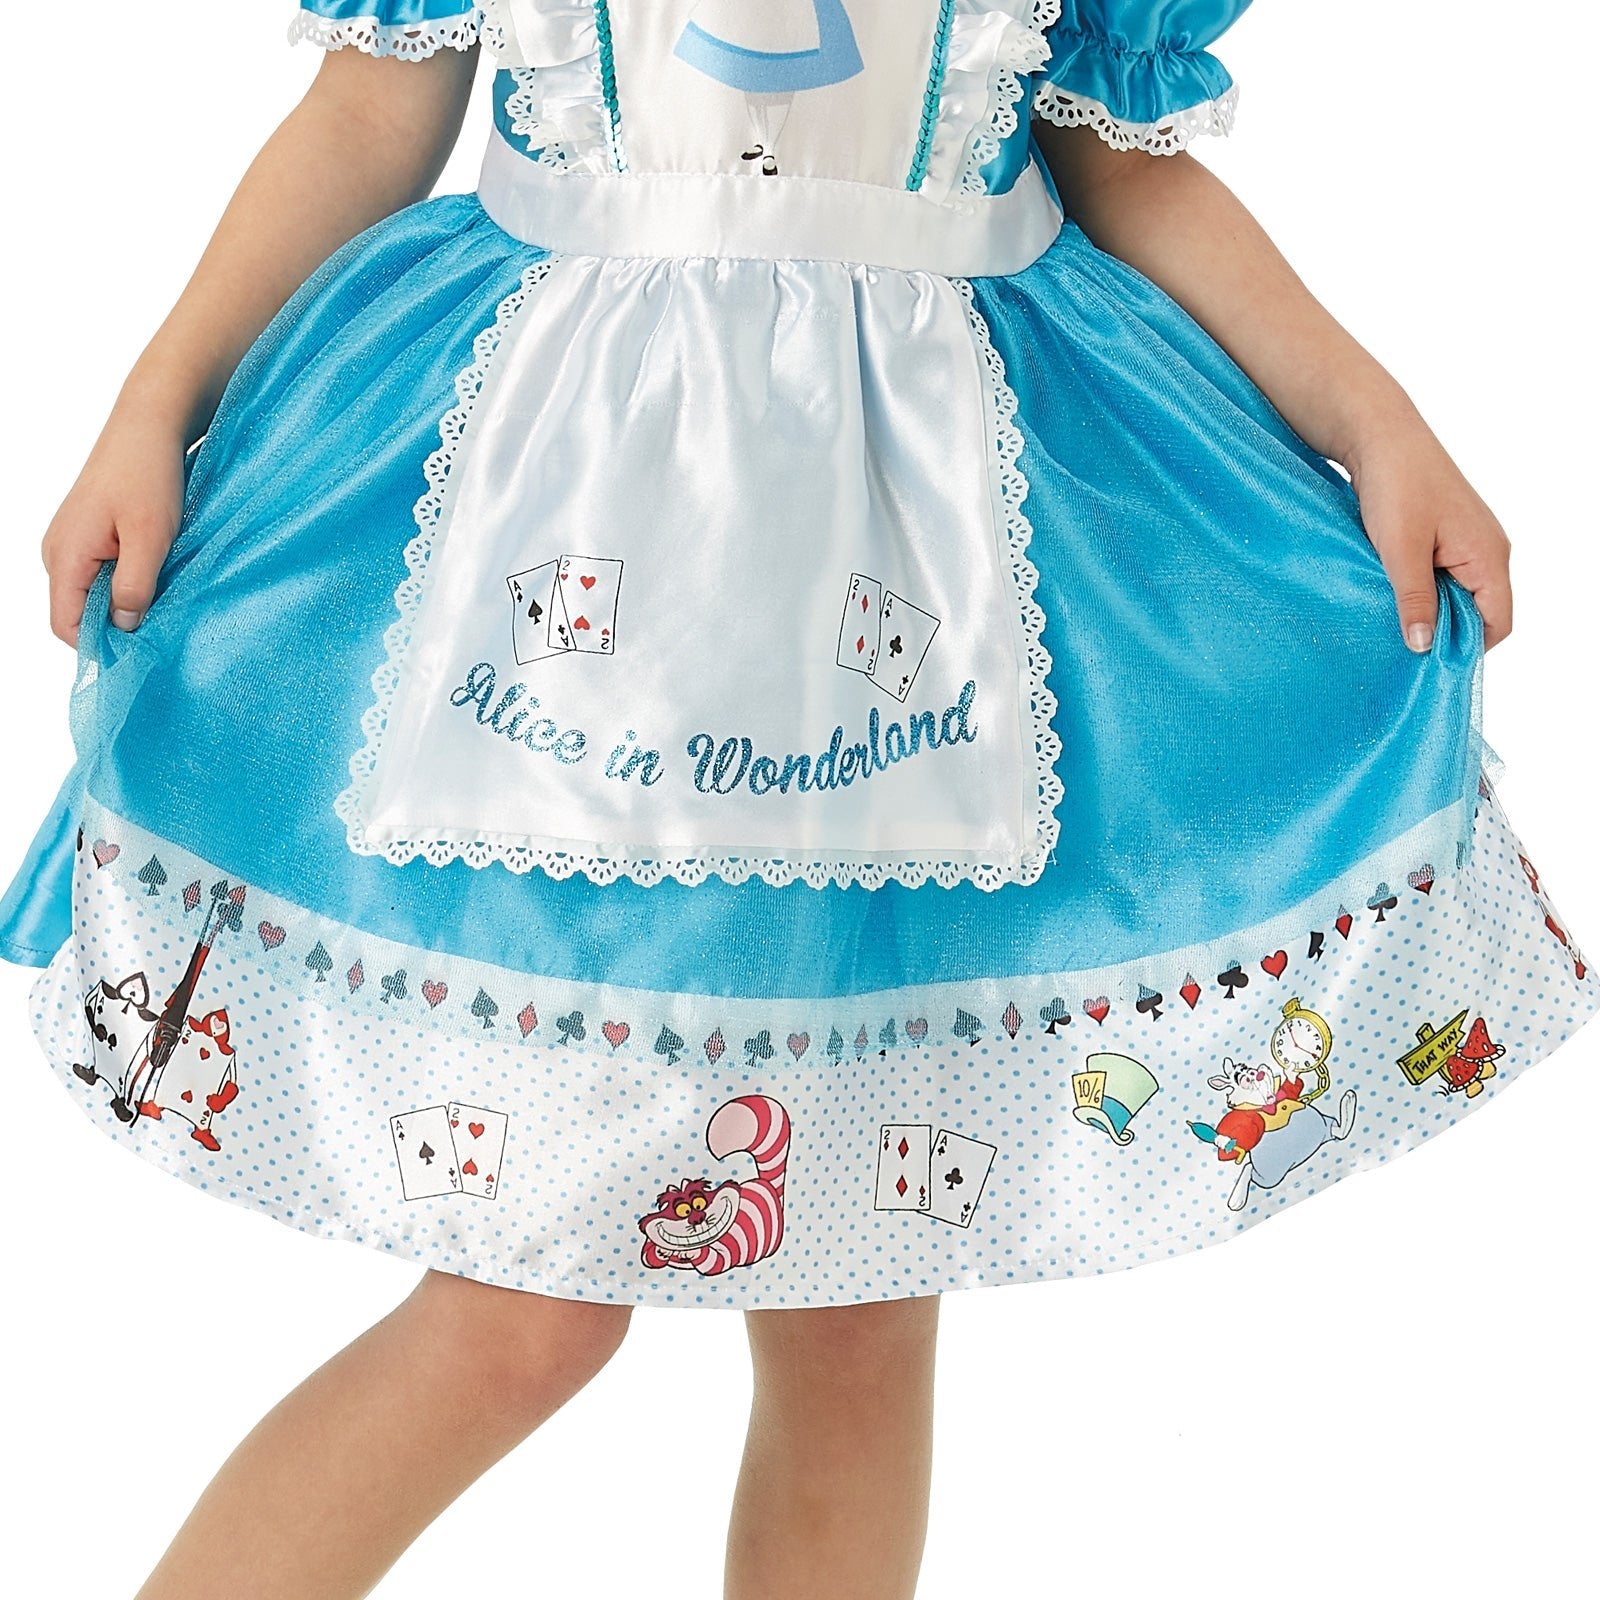 Alice in Wonderland costume Ideal for Halloween and themed events.